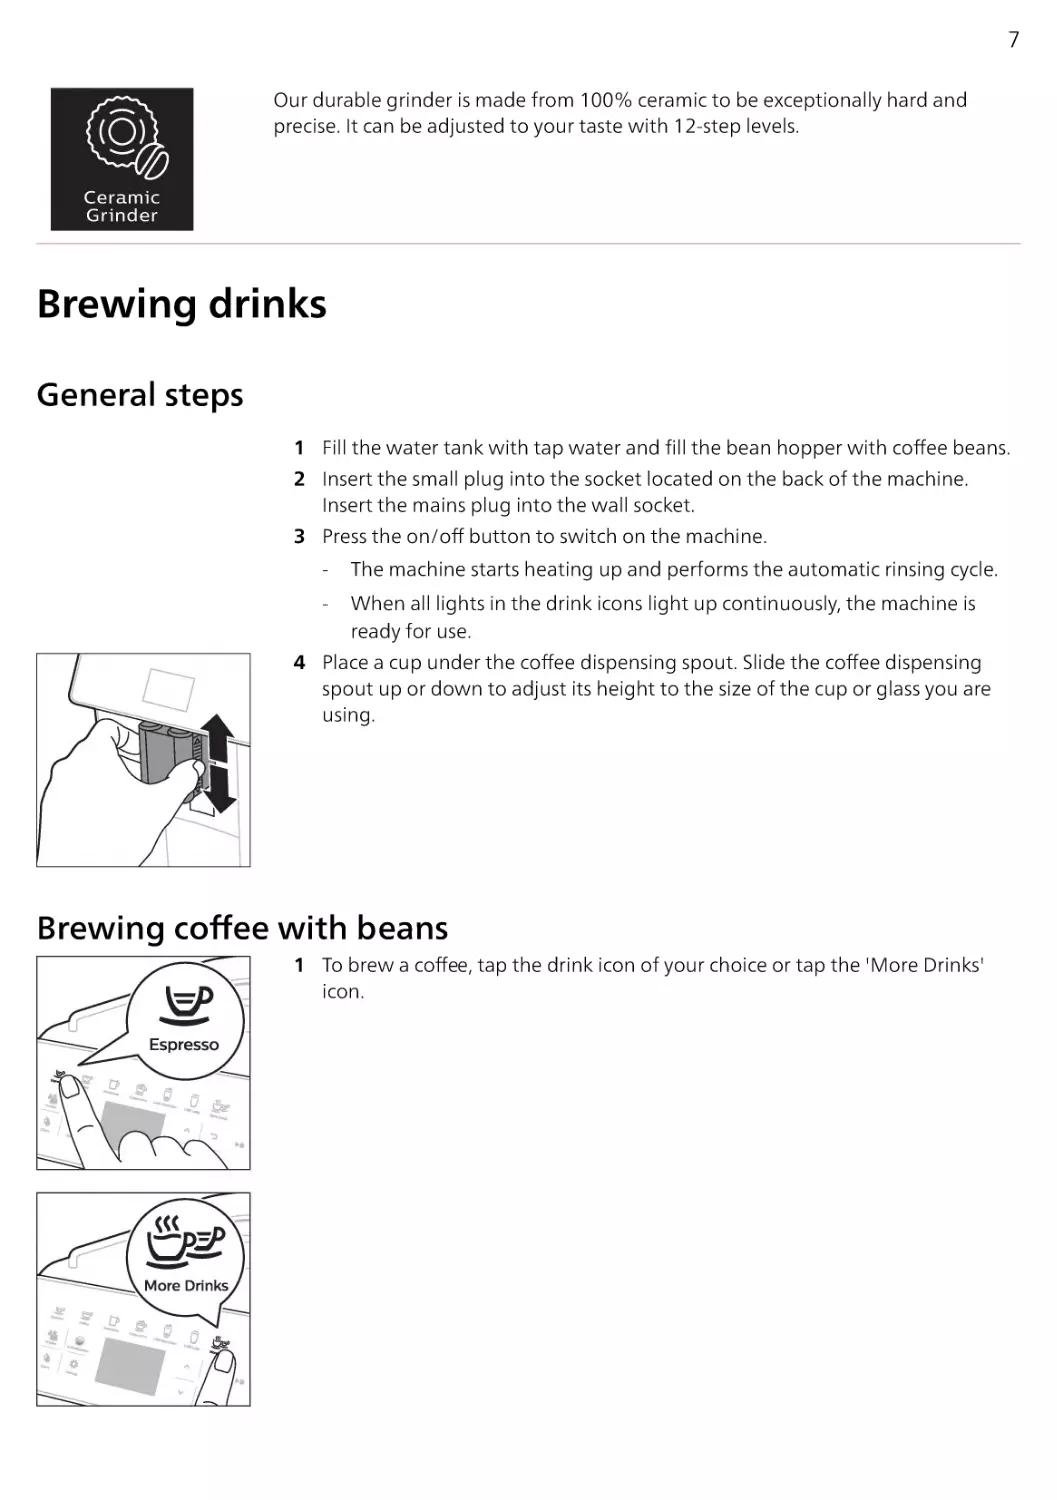 Brewing drinks
General steps
Brewing coffee with beans